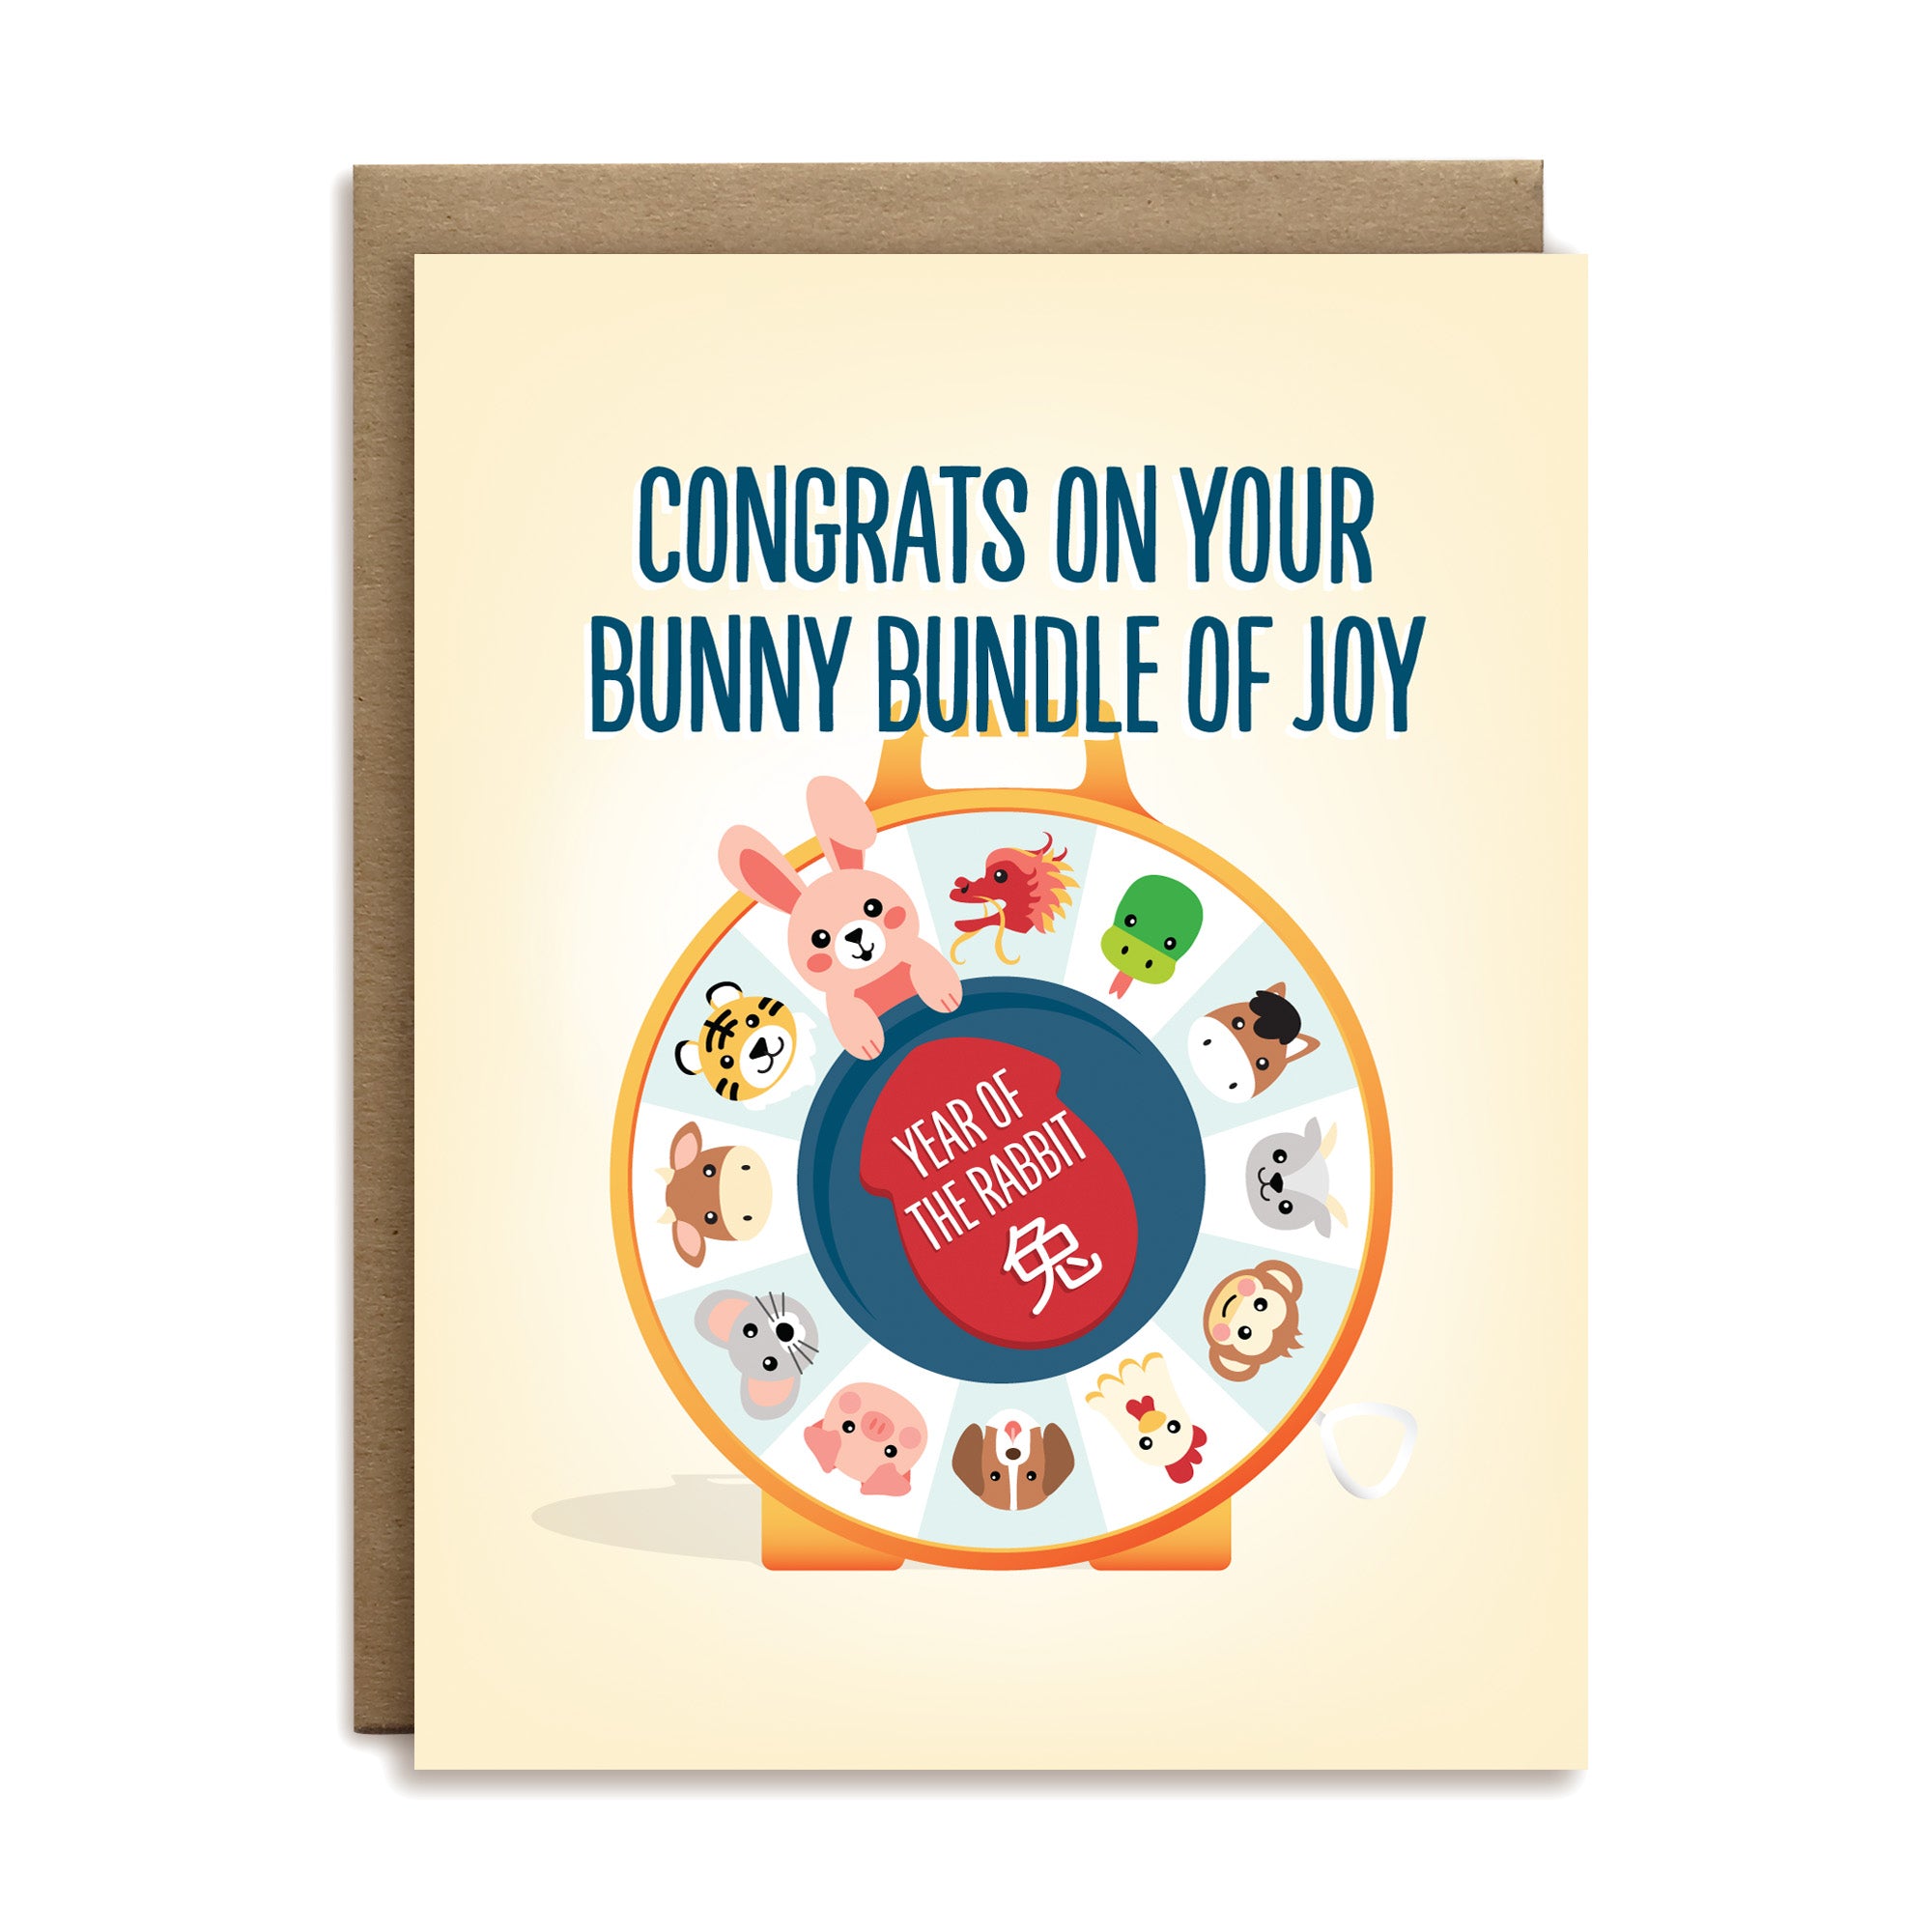 Congrats on your bunny bundle of joy, year of the rabbit baby greeting card by I&